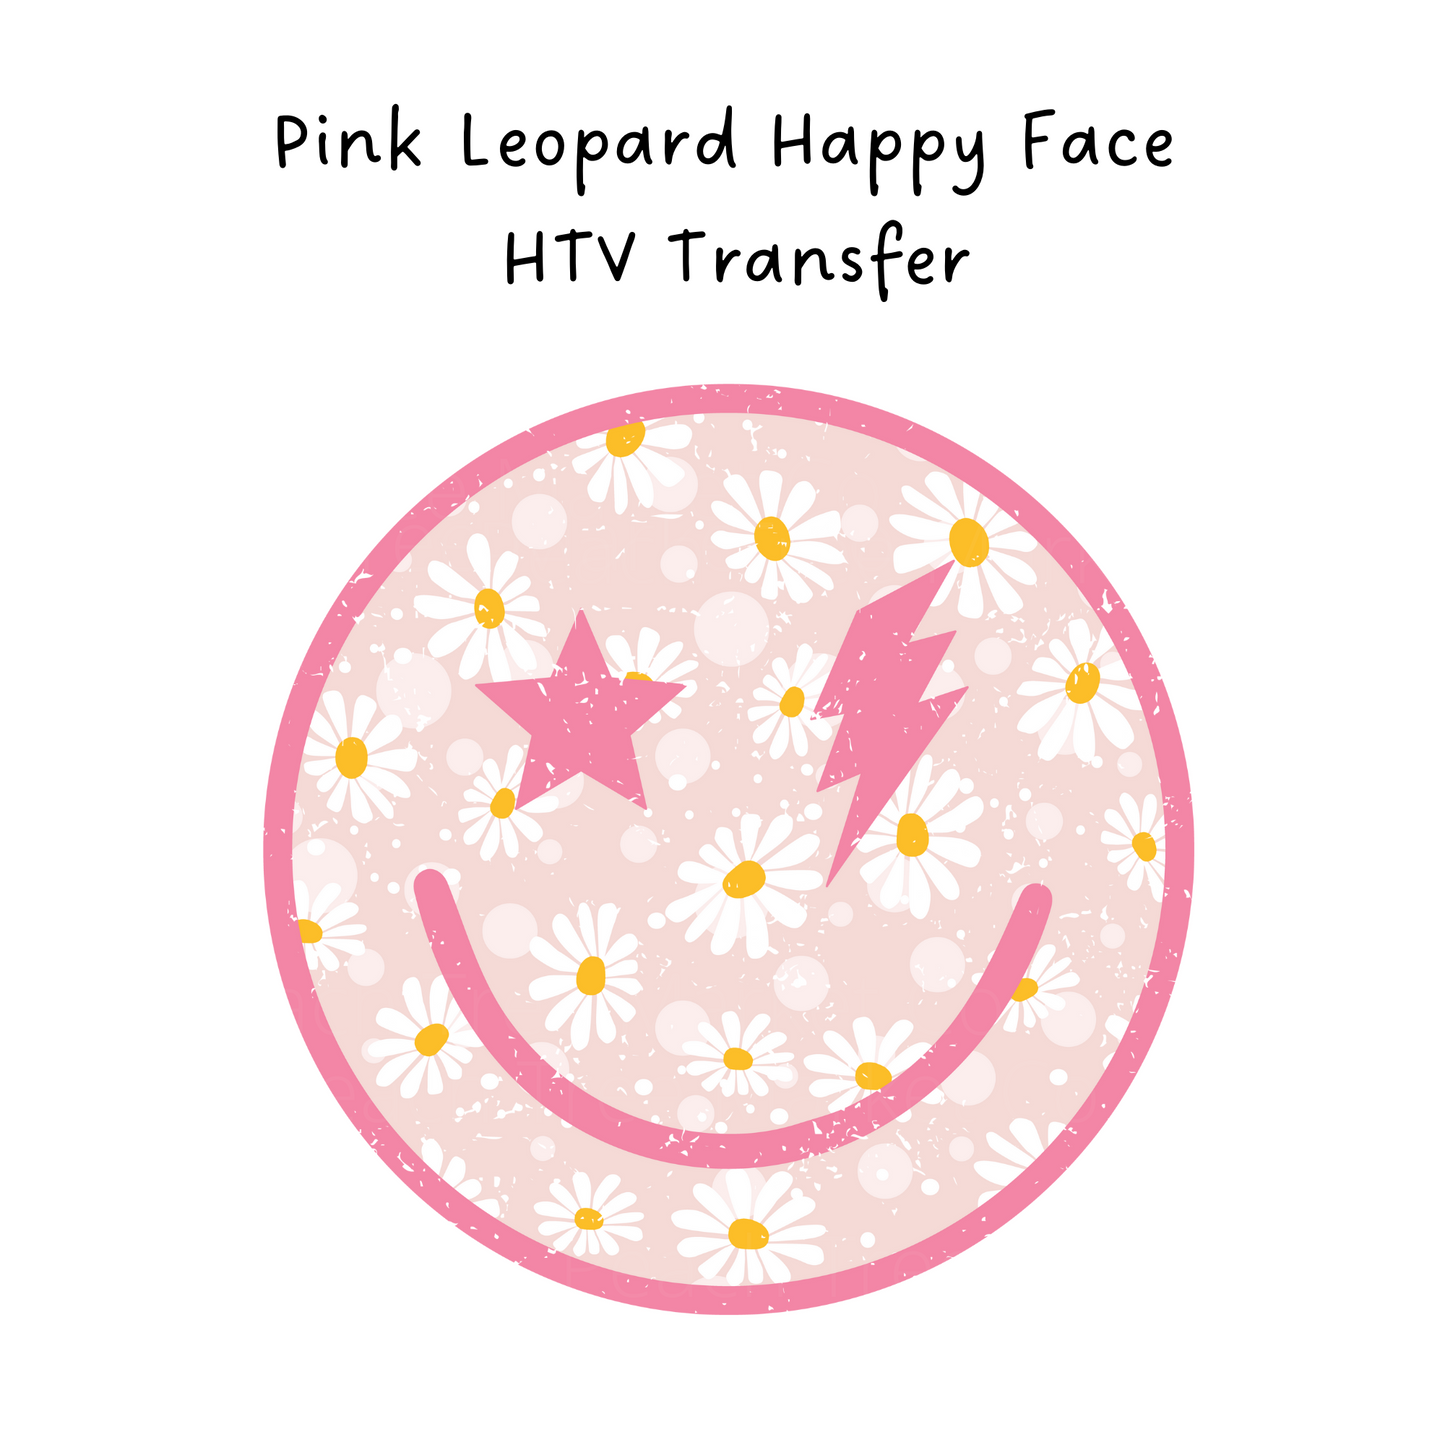 Pink Leopard Happy Face HTV Transfer